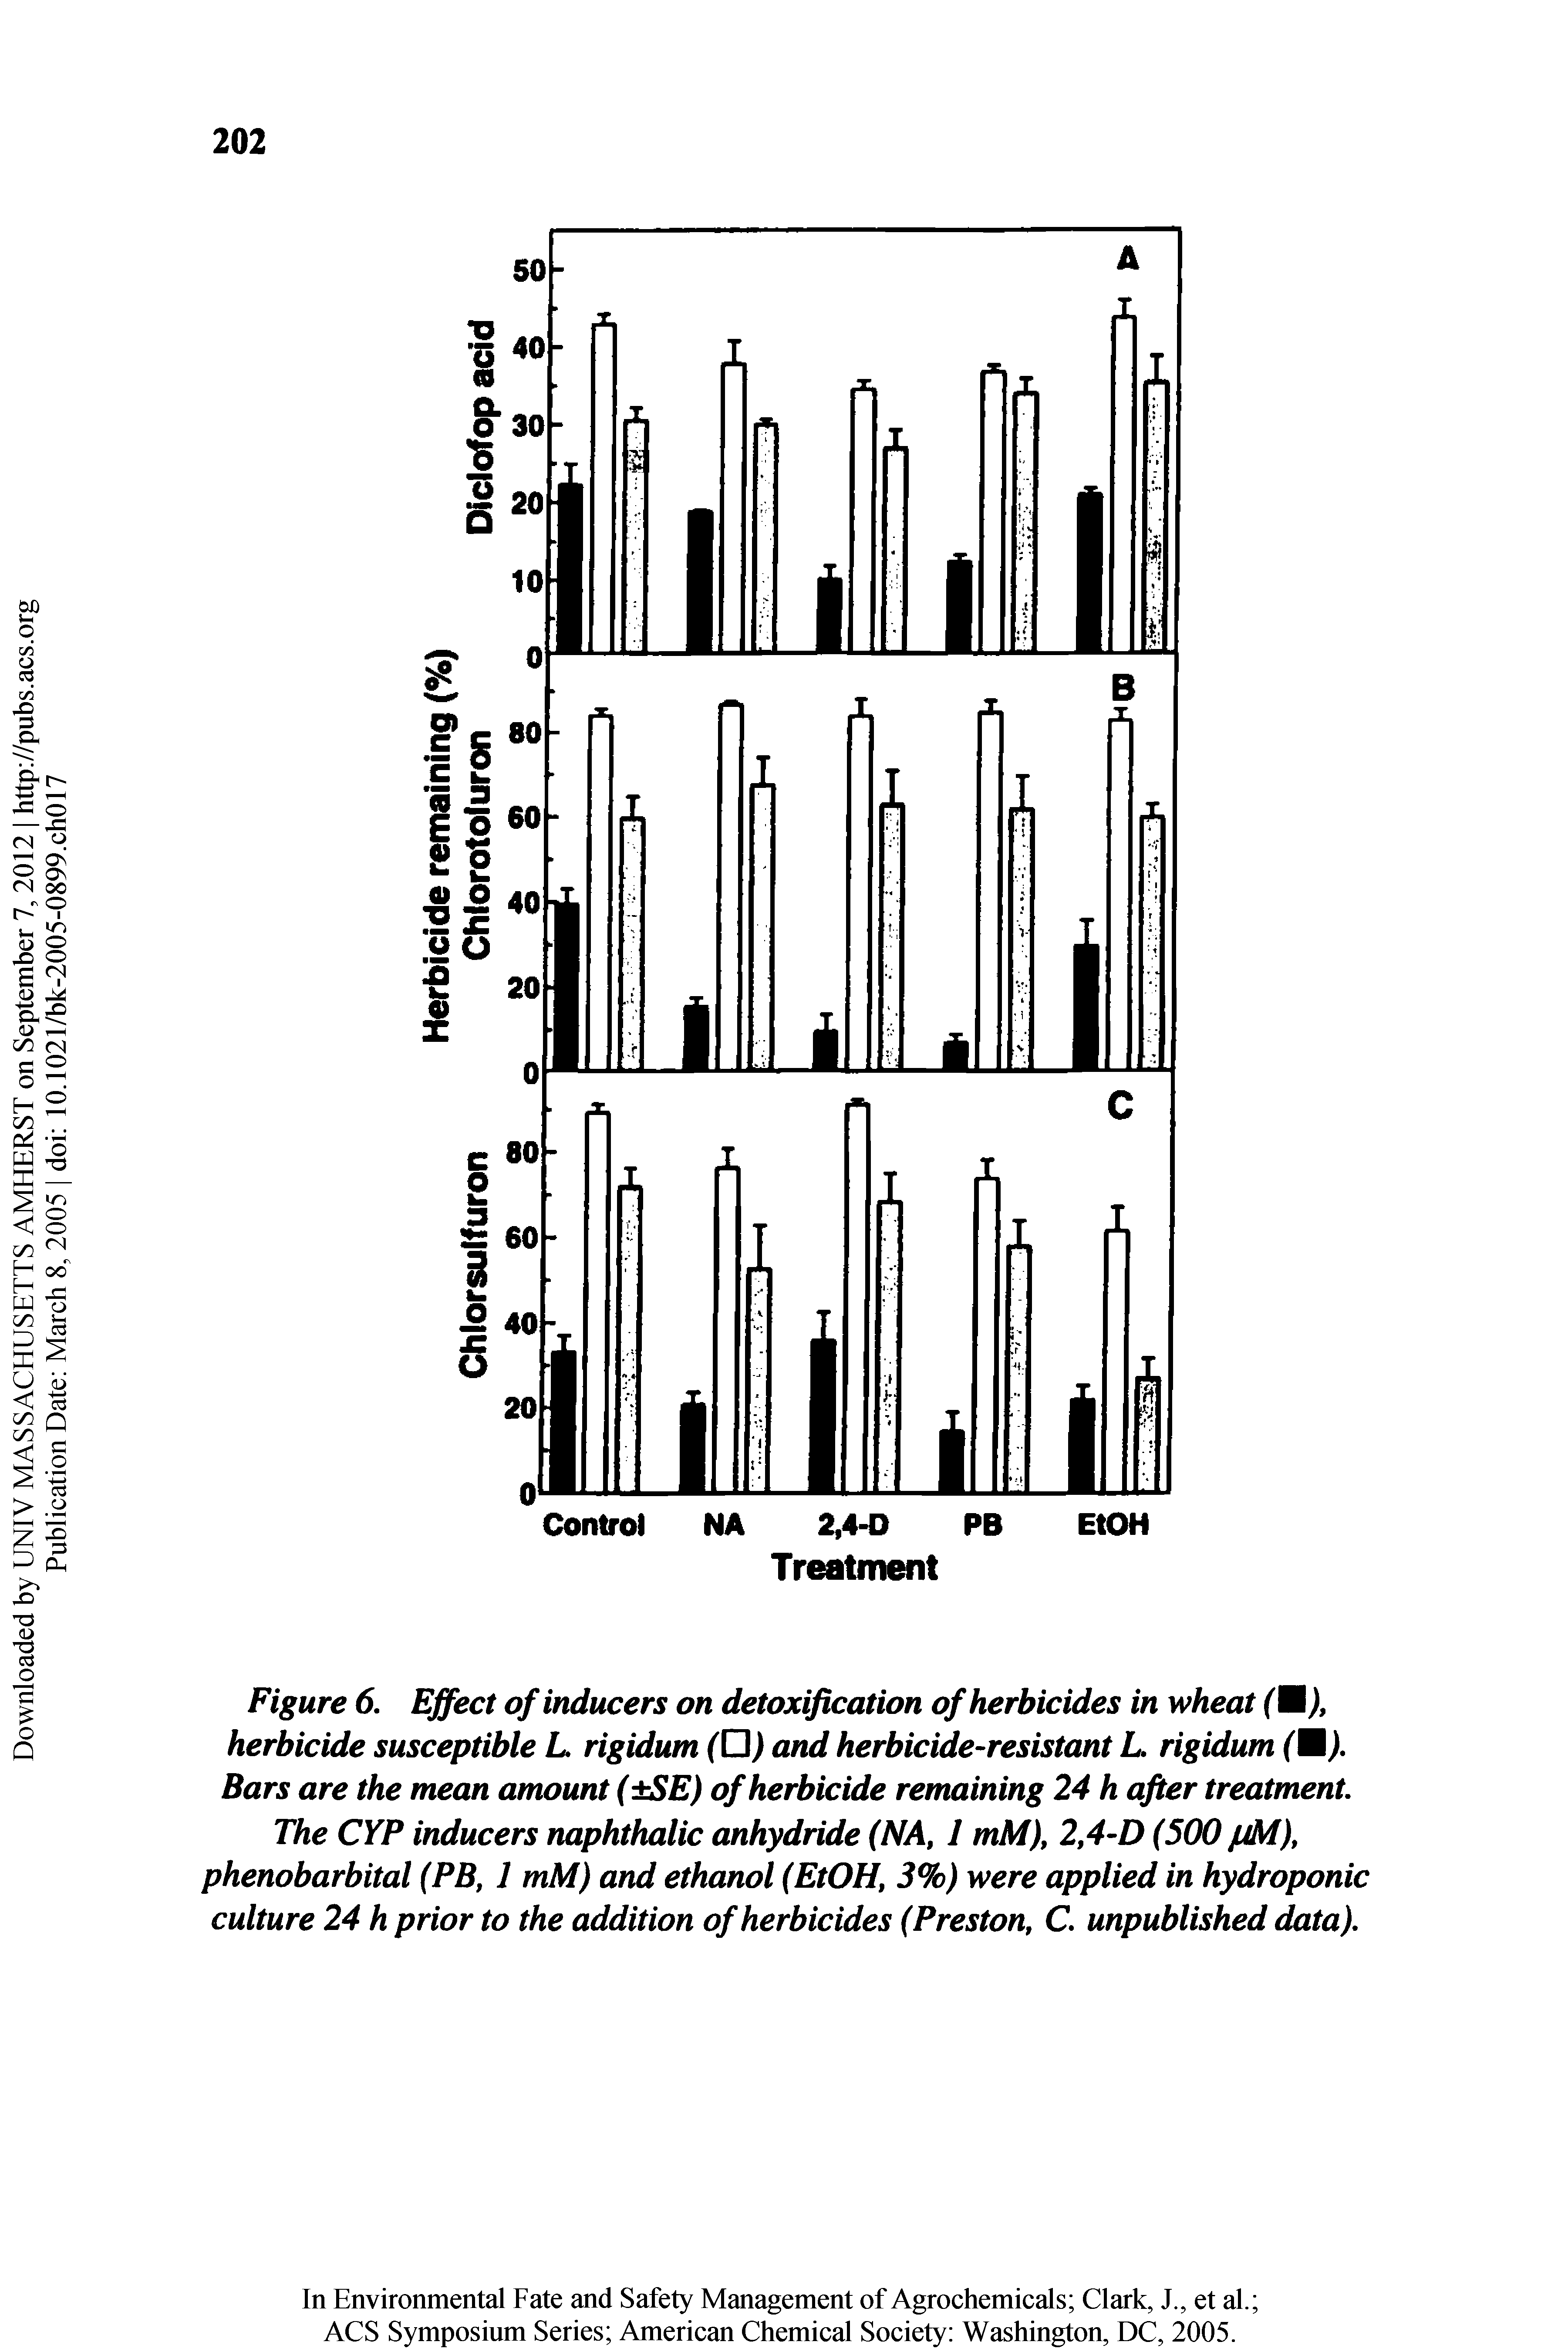 Figure 6. Effect of inducers on detoxification of herbicides in wheat (M), herbicide susceptible L rigidum ( ) and herbicide-resistant L rigidum (M), Bars are the mean amount ( SE) of herbicide remaining 24 h after treatment The CYP inducers naphthalic anhydride (NA, I mM), 2,4-D (500 juM), phenobarbital (PB, 1 mM) and ethanol (EtOH, 3%) were applied in hydroponic culture 24 h prior to the addition of herbicides (Preston, C. unpublished data).